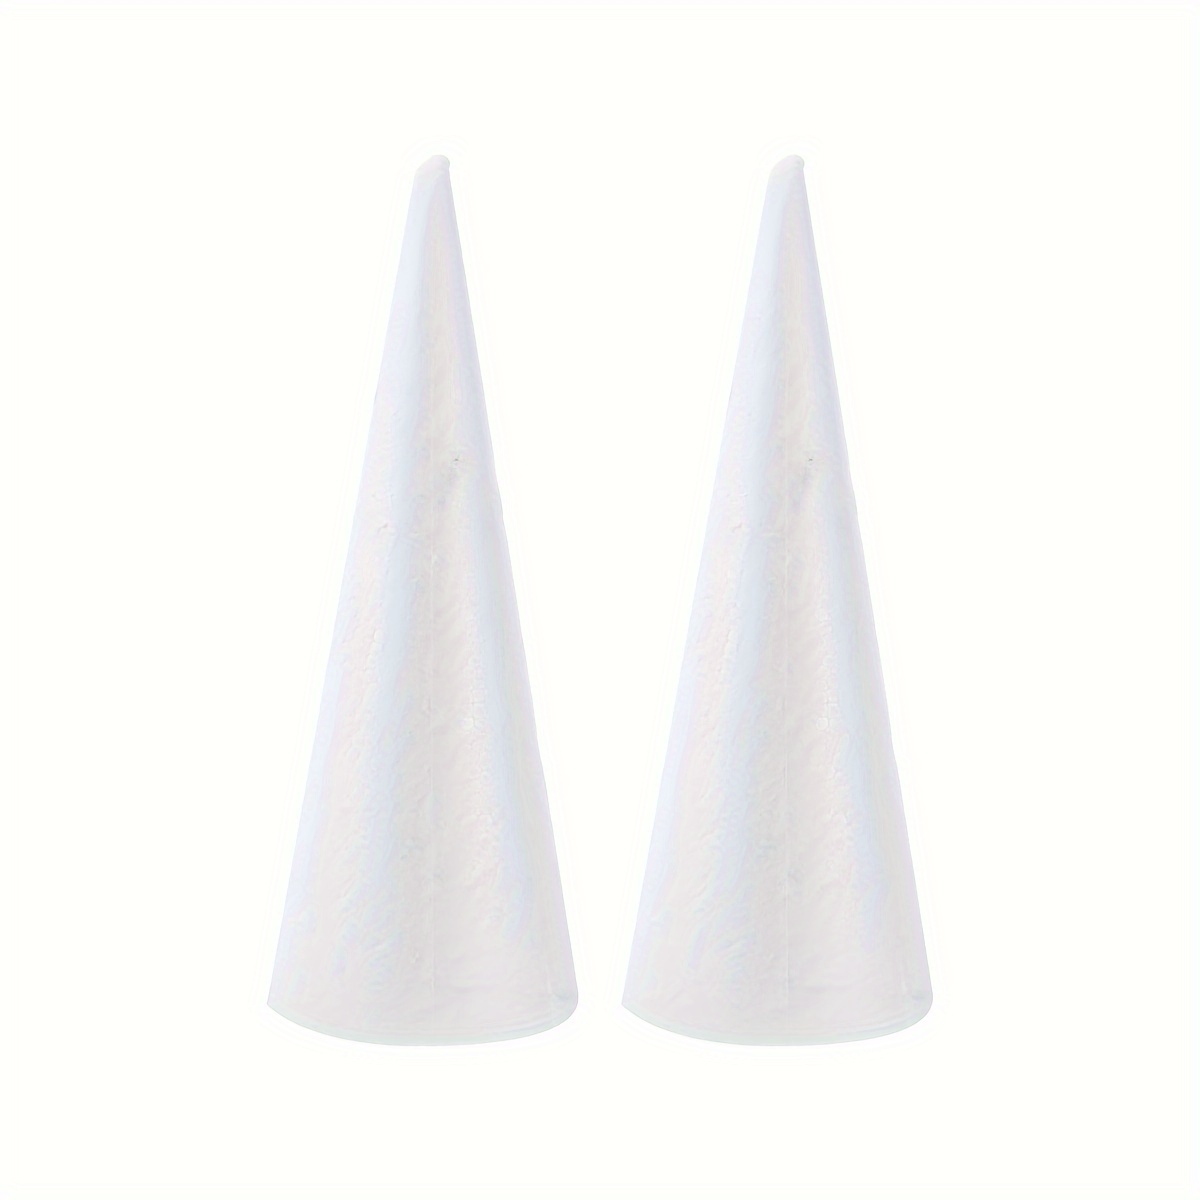  Holibanna 12pcs Cake Toppers Christmas Foam Crafts Handmade  Foam Cone Craft Foam Cone Foam Sphere for Craft Foam Ball for Painting  Floral Foam Car Holder Child Dome White